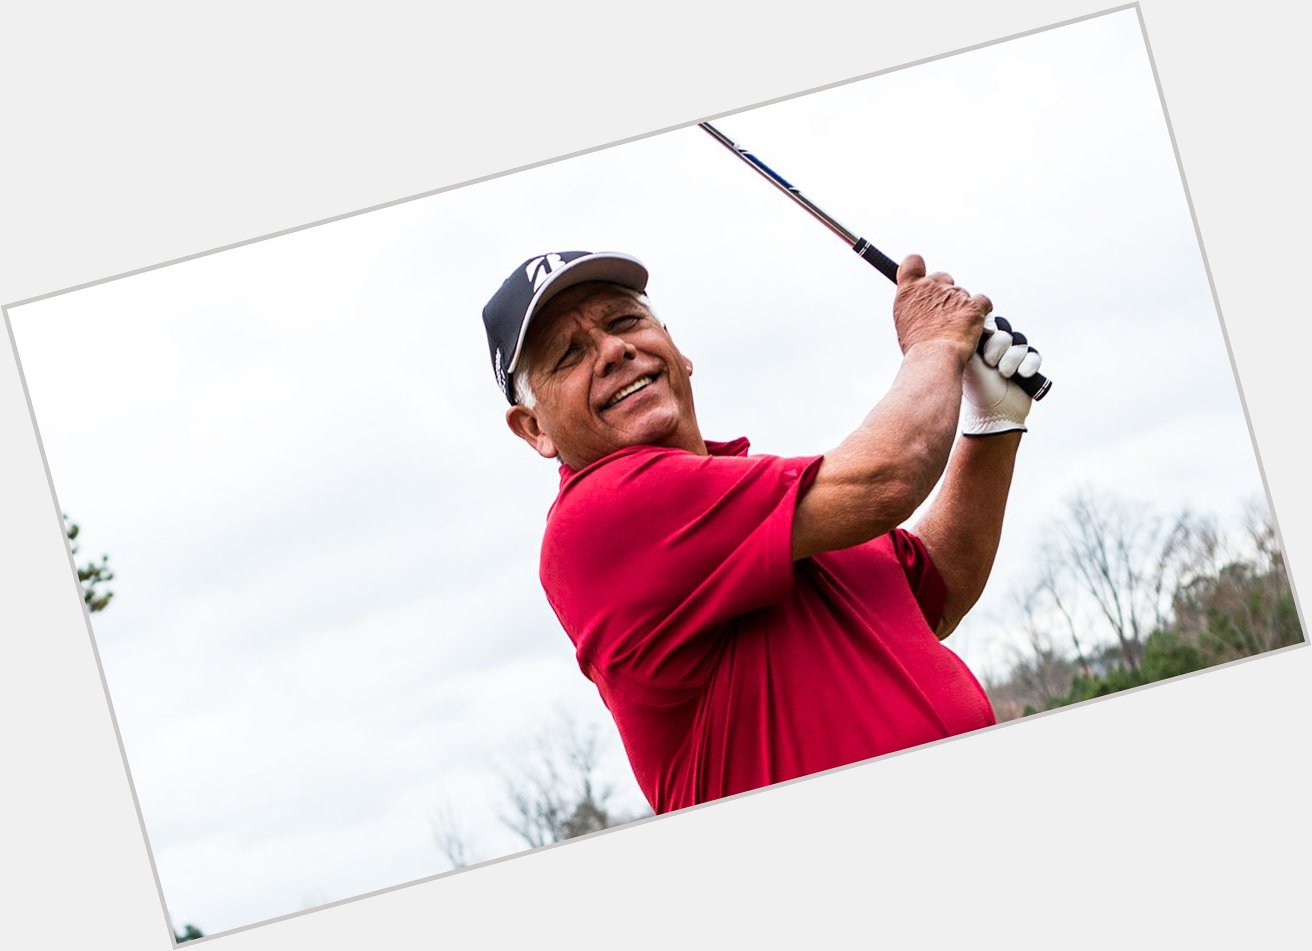 Happy 76th Birthday to The Merry Mex!! Lee Trevino\s 76 years young today! Still one of the best smiles in 